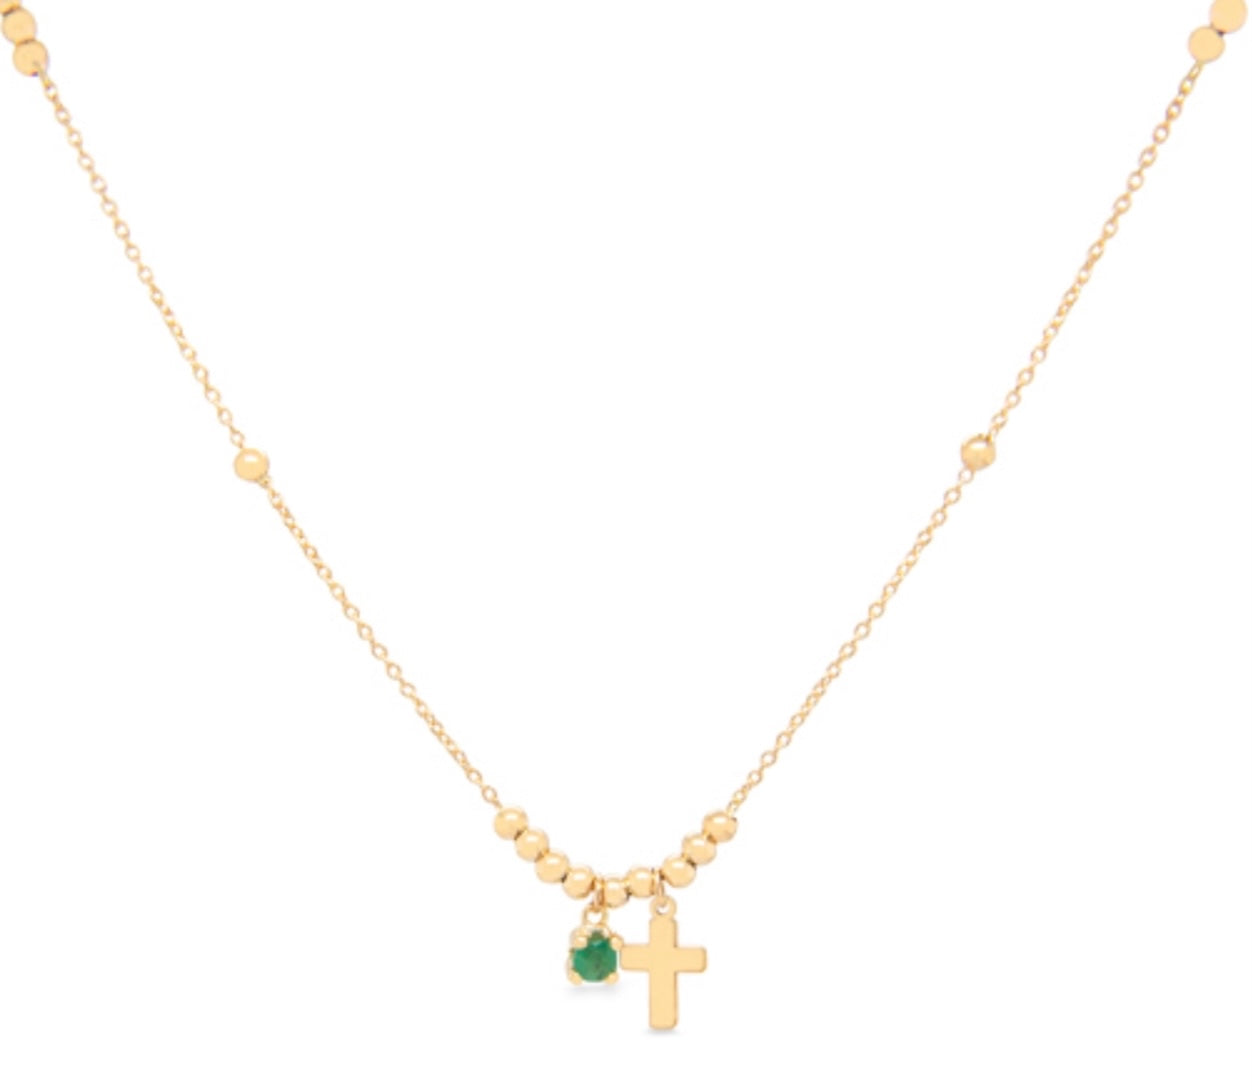 Emerald + 18k Gold Necklace